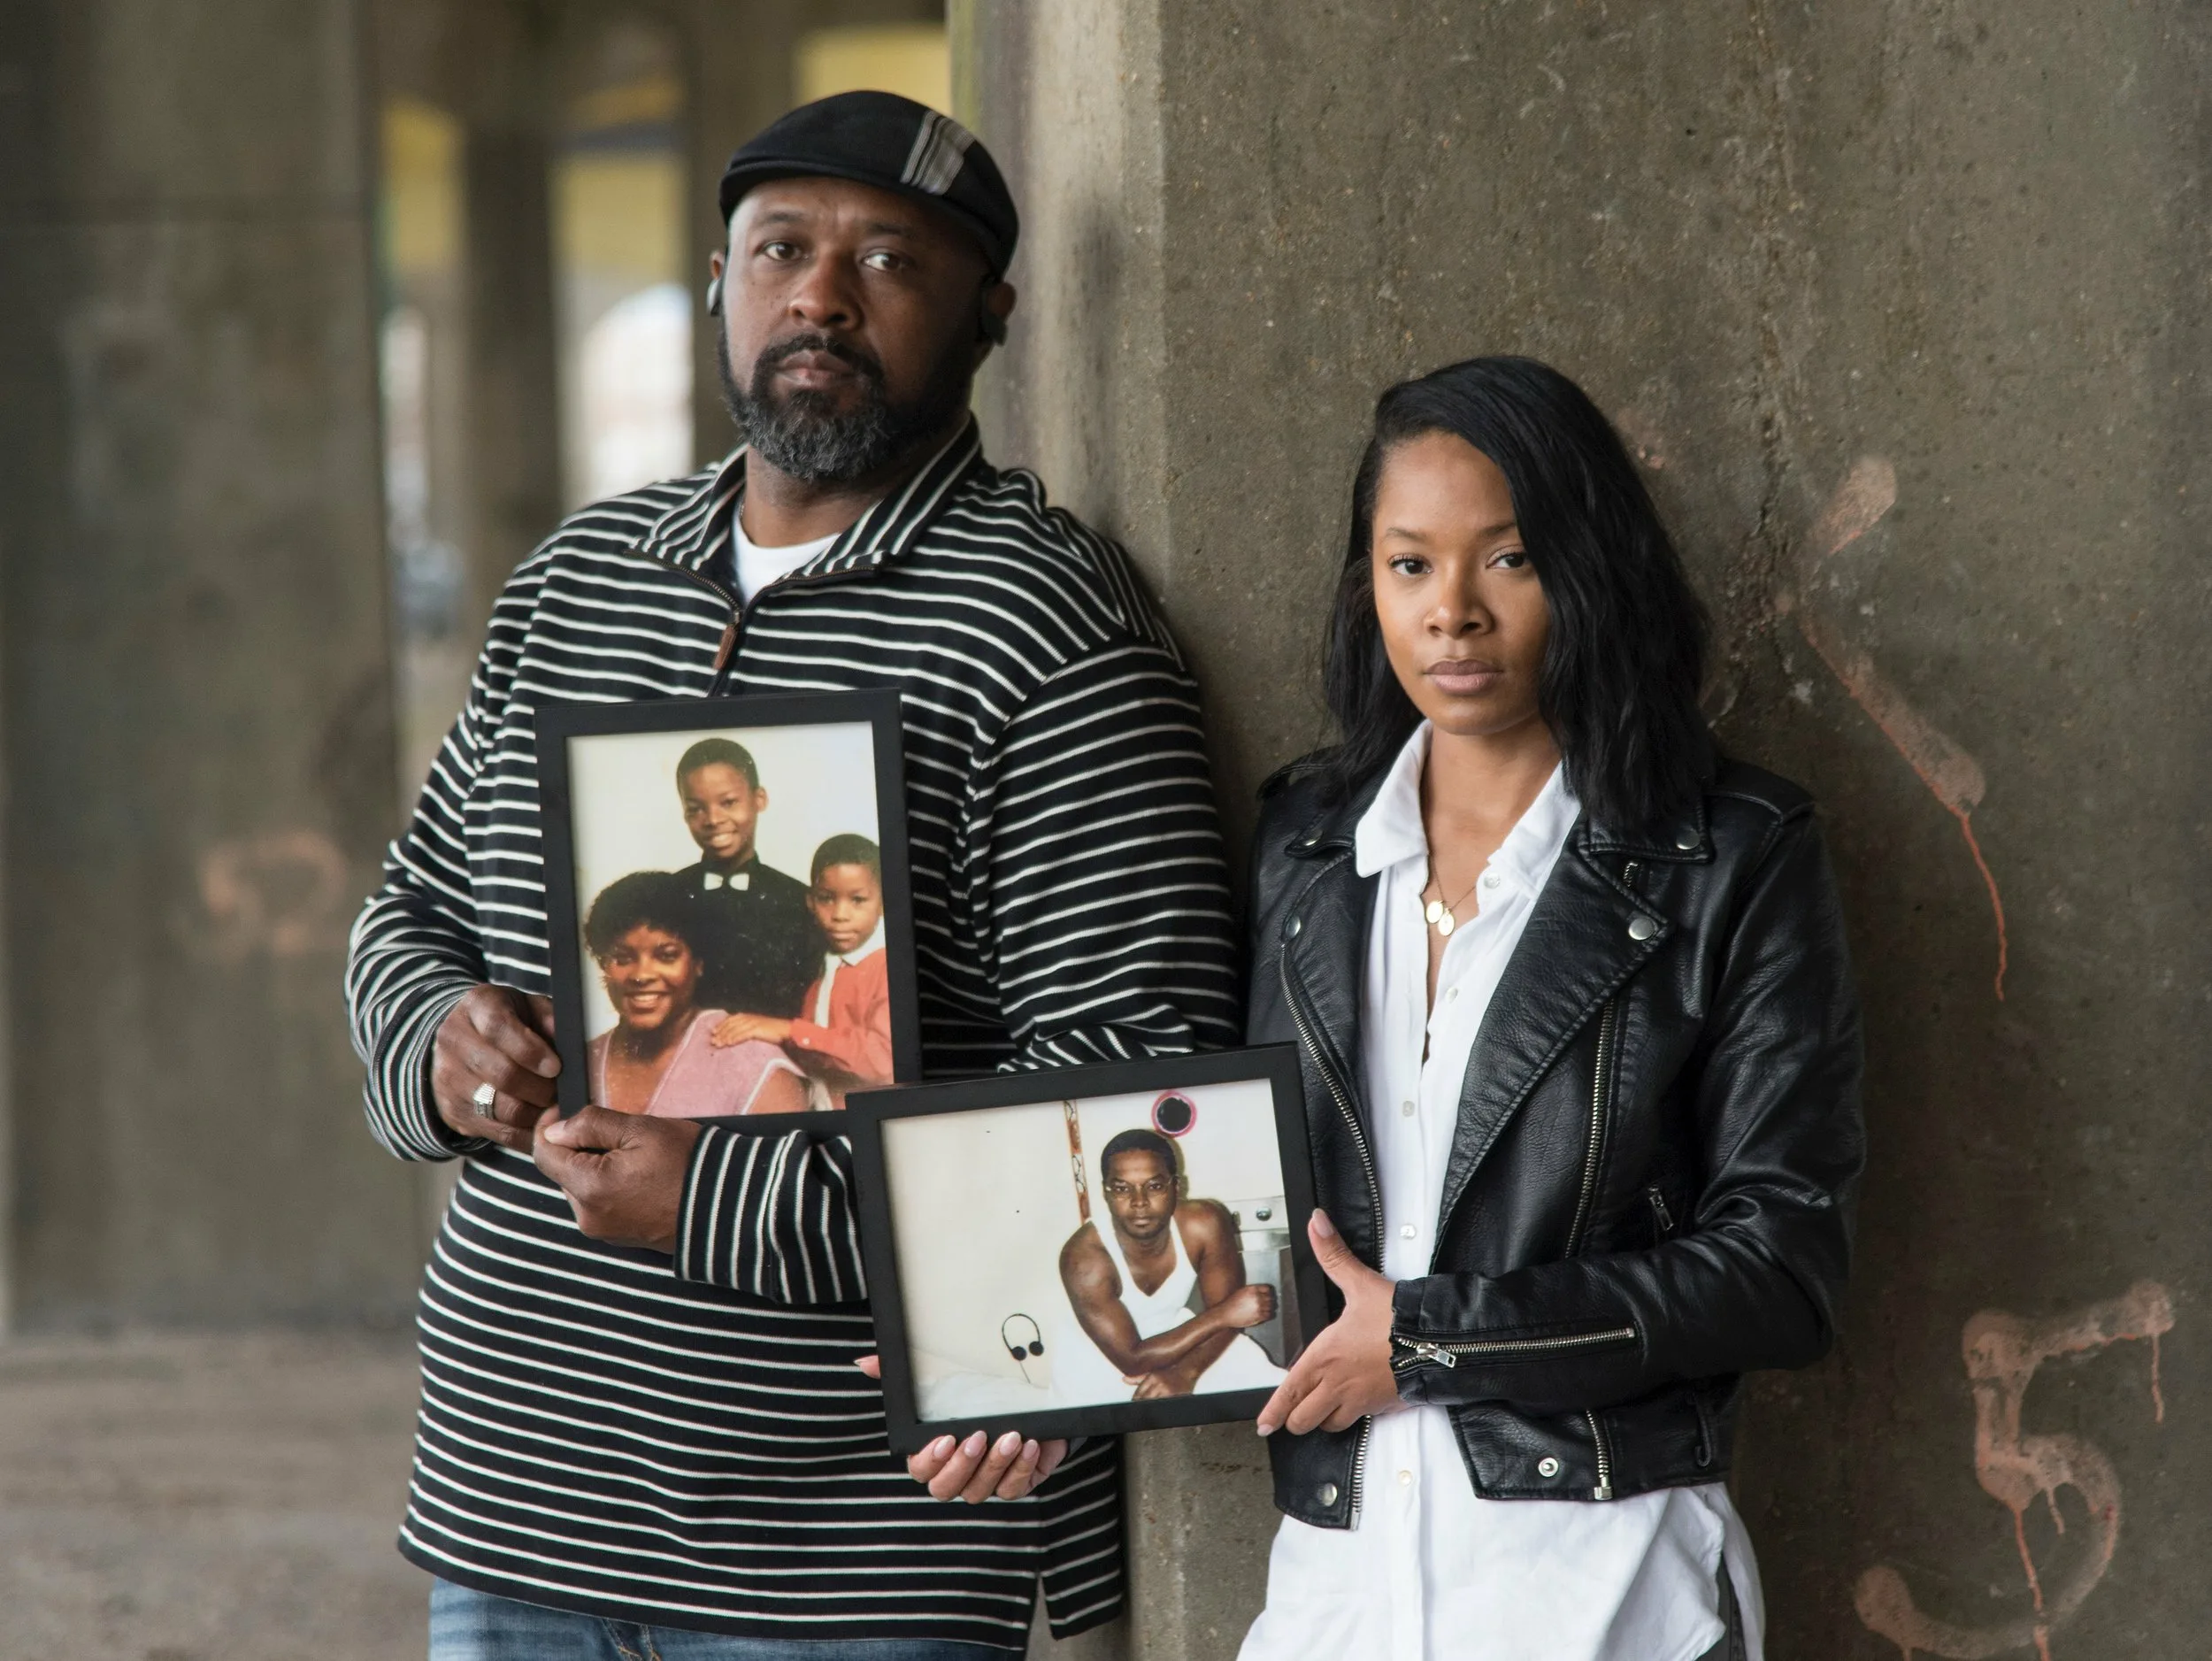 Toforest Johnson's Family Members, daughter Shanaye Poole and cousin Tony Green with photos of Mr. Johnson.  Photos by Bernard Troncale.